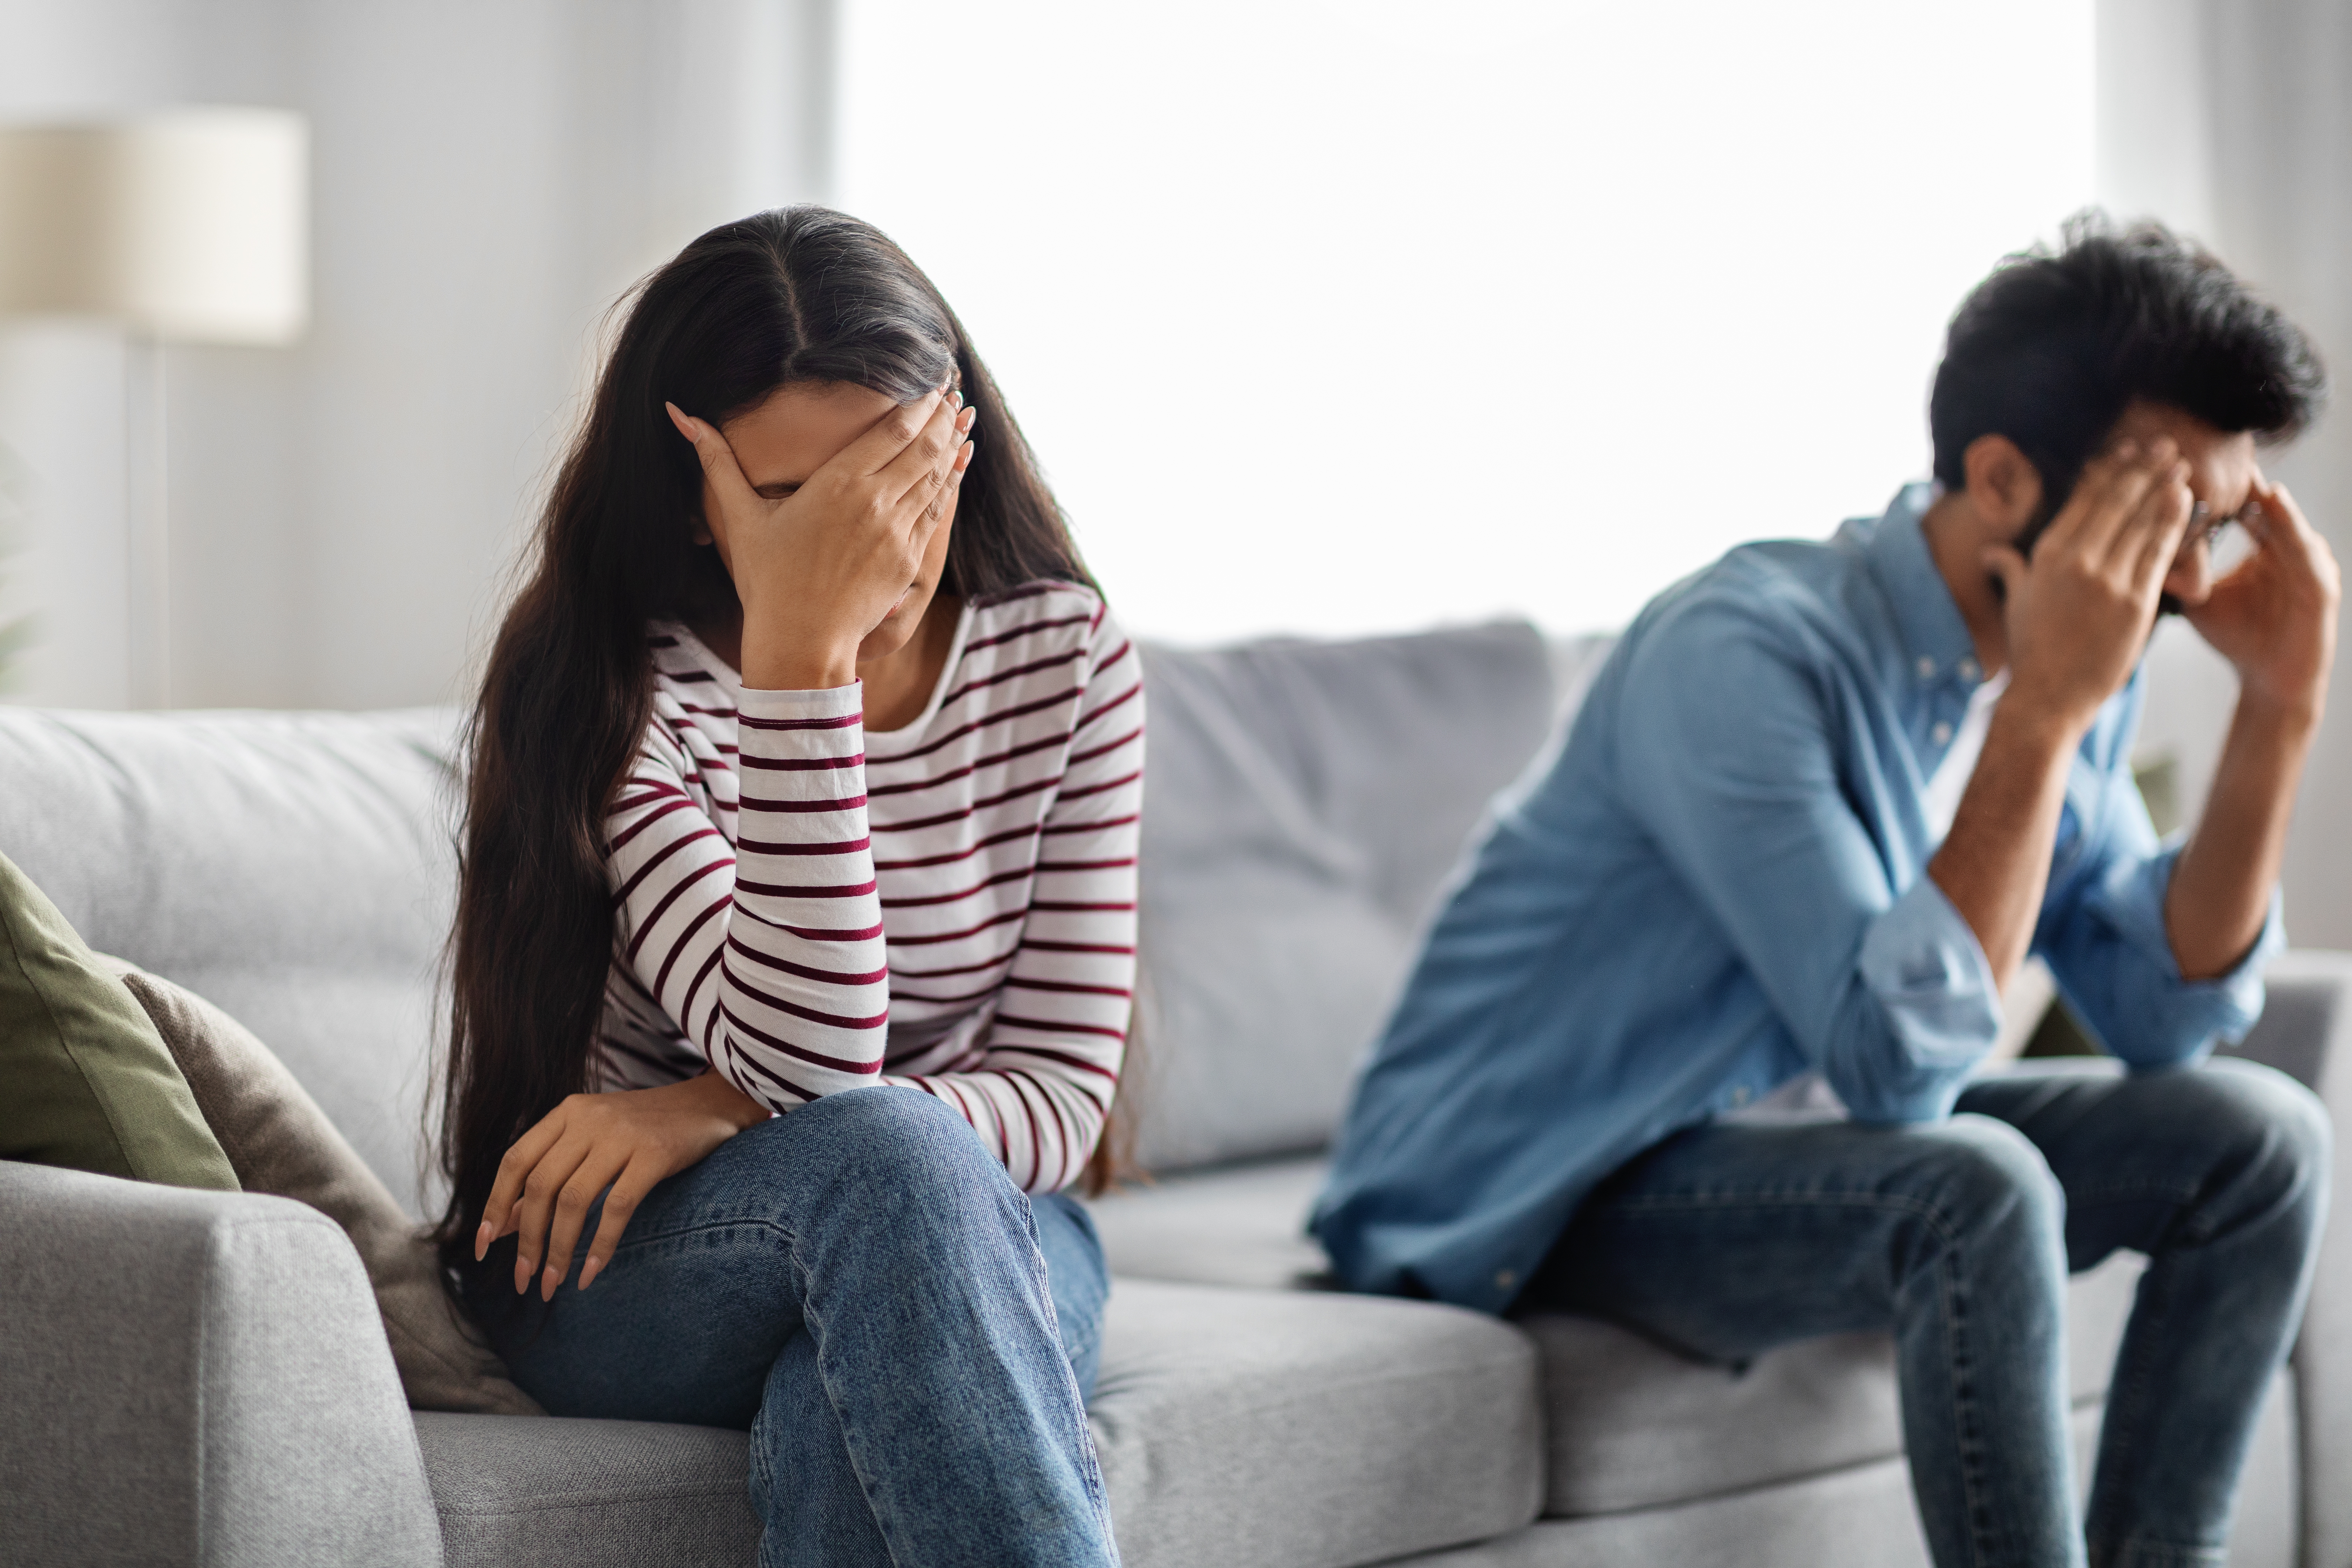 Unhappy young middle eastern couple have quarrel at home| Source: Shutterstock.com